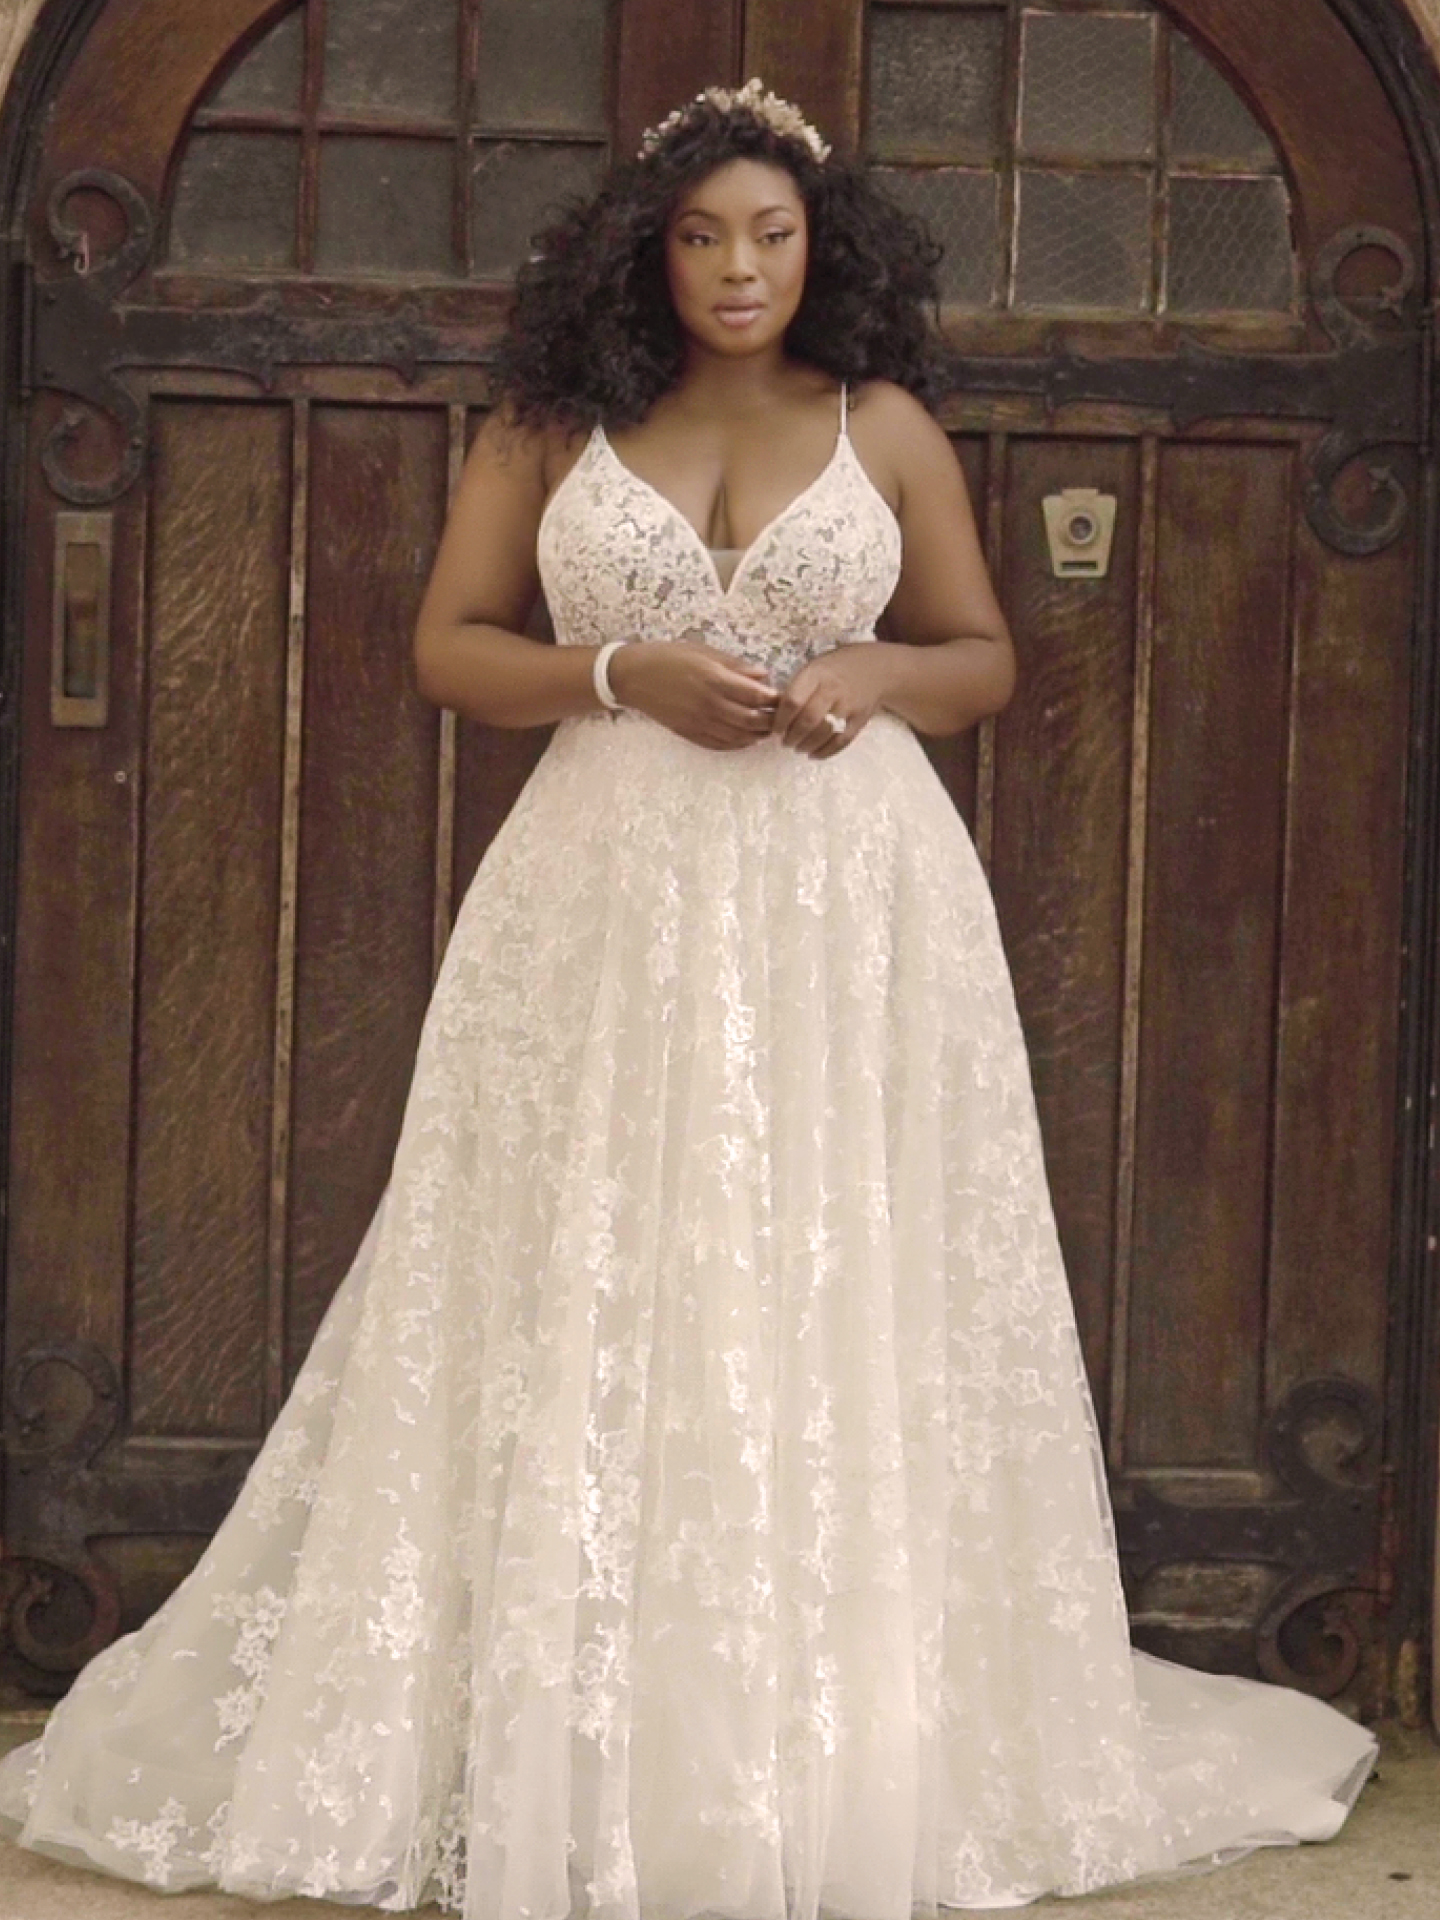 Black Model Wearing Plus Size A-line Wedding Dress Called Lorenza by Maggie Sottero